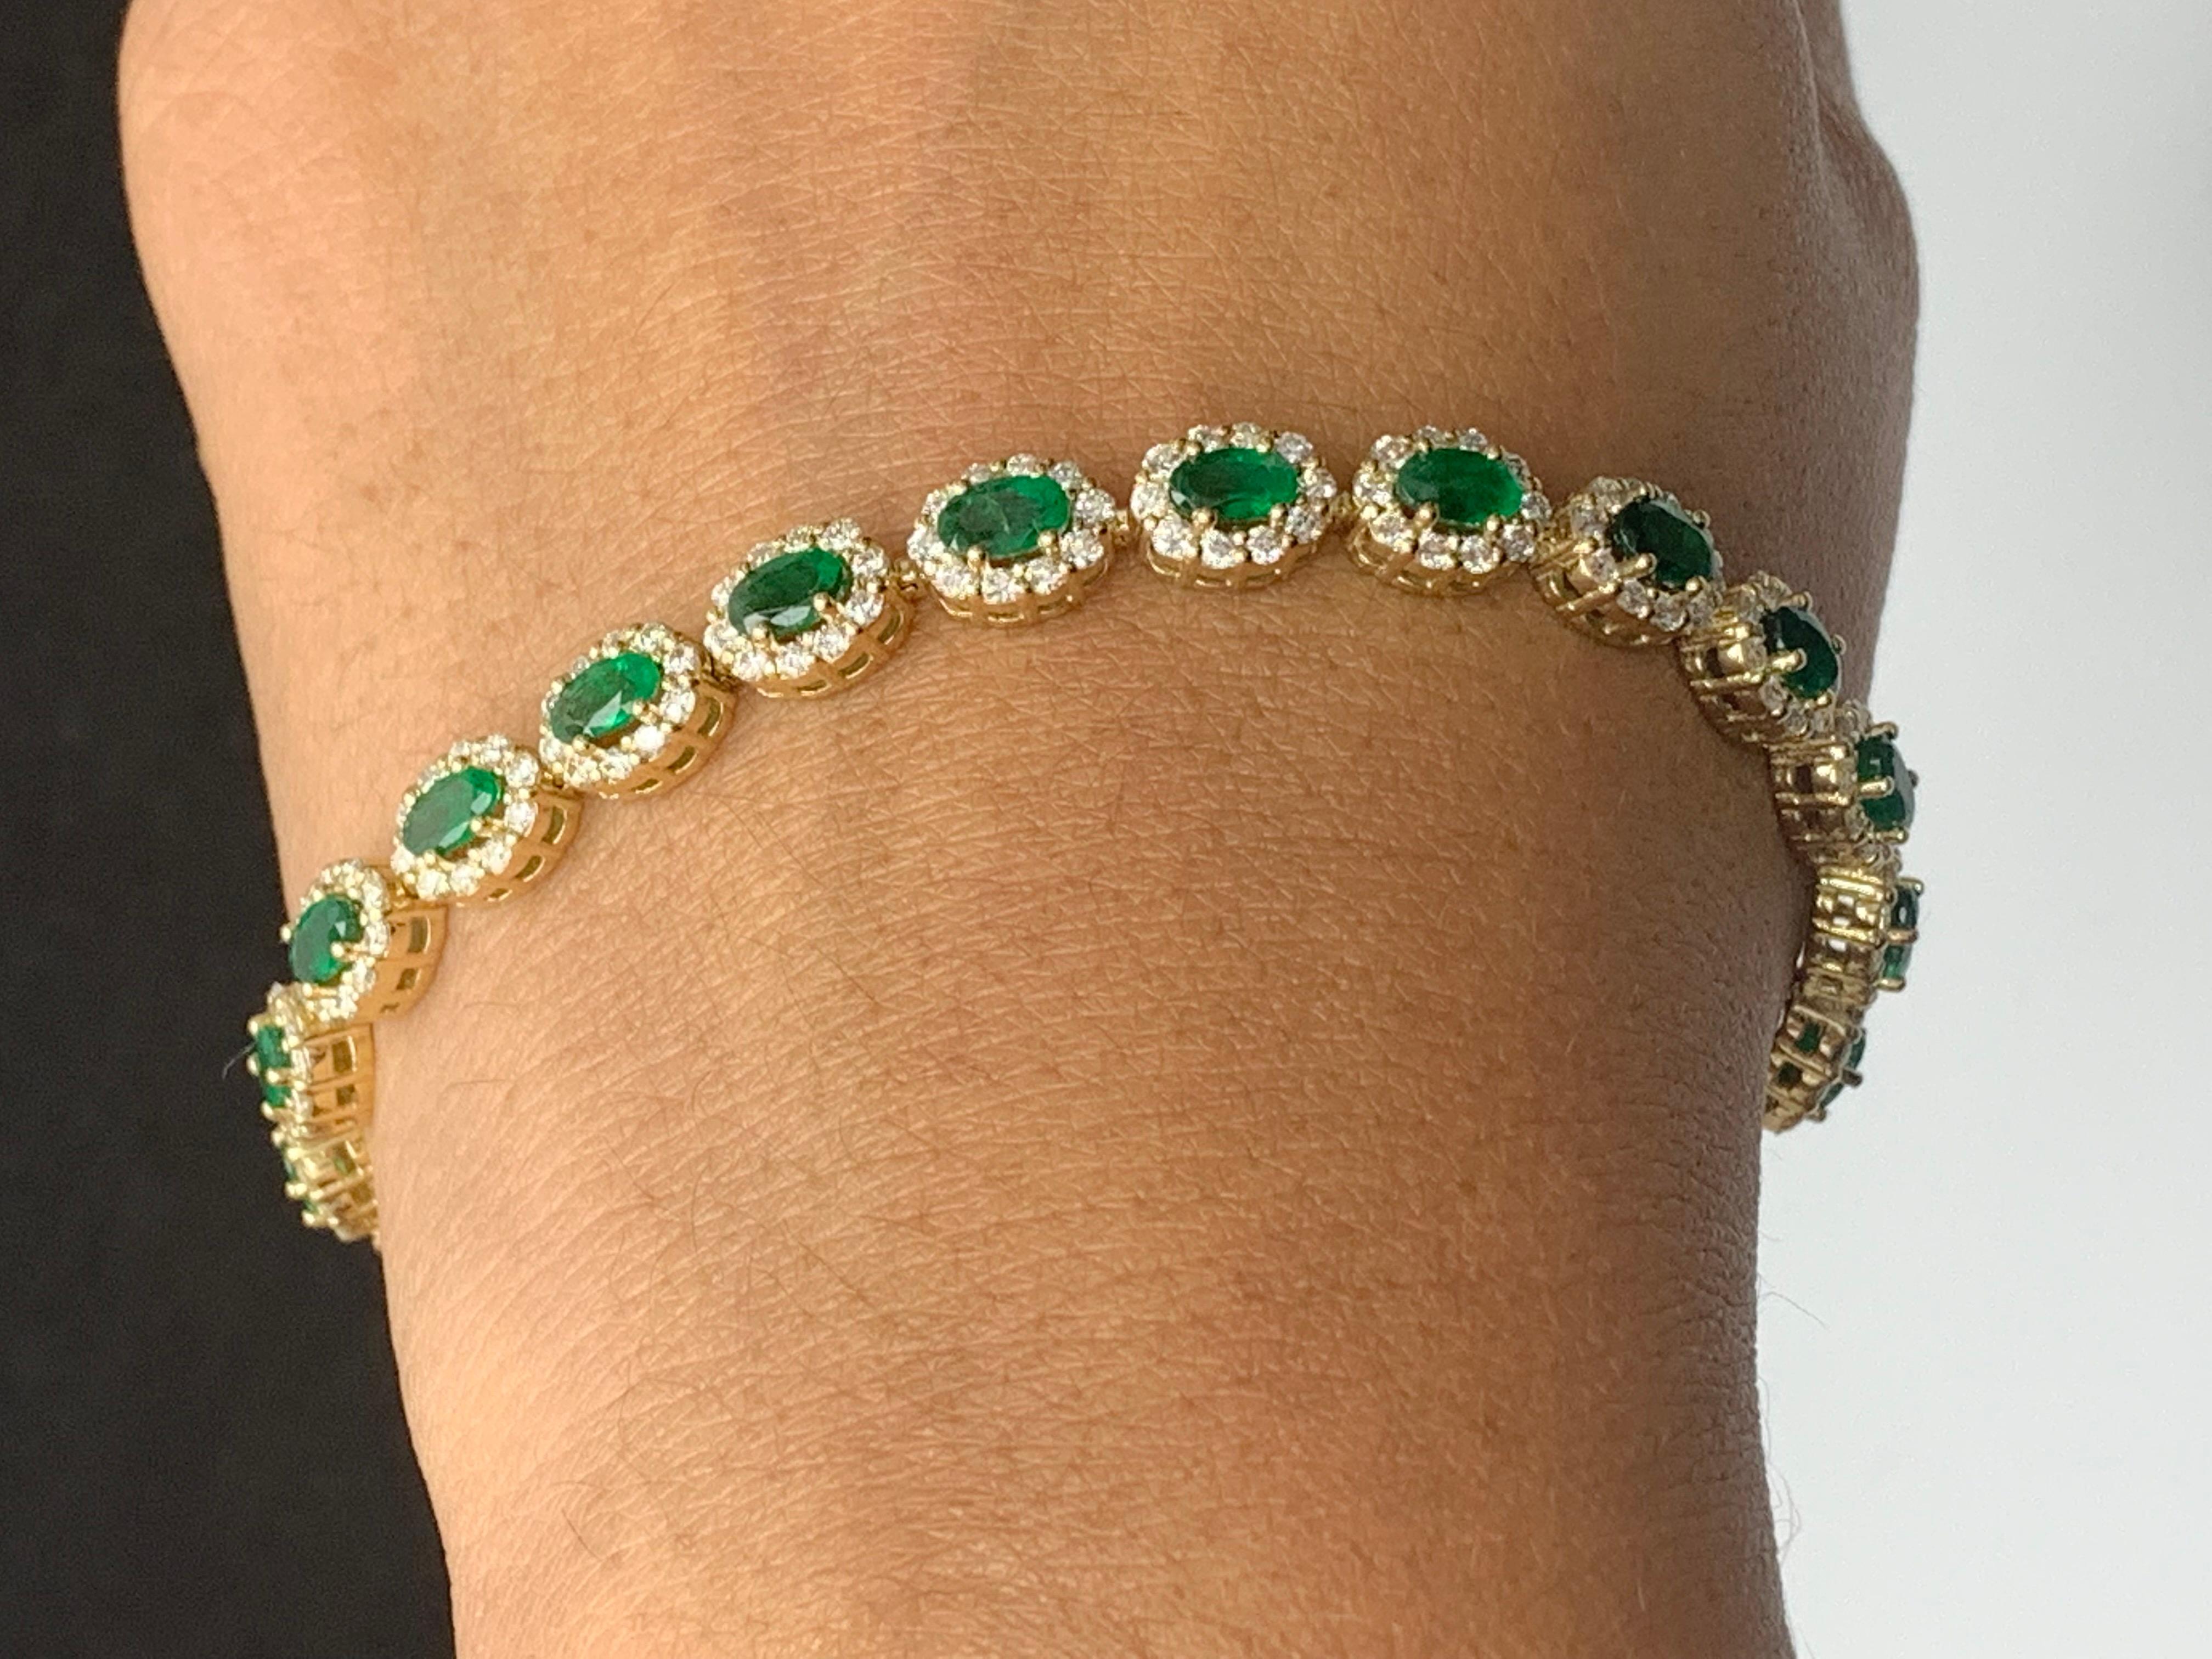 4.69 Carat Oval Cut Emerald and Diamond Halo Bracelet in 14K Yellow Gold For Sale 8